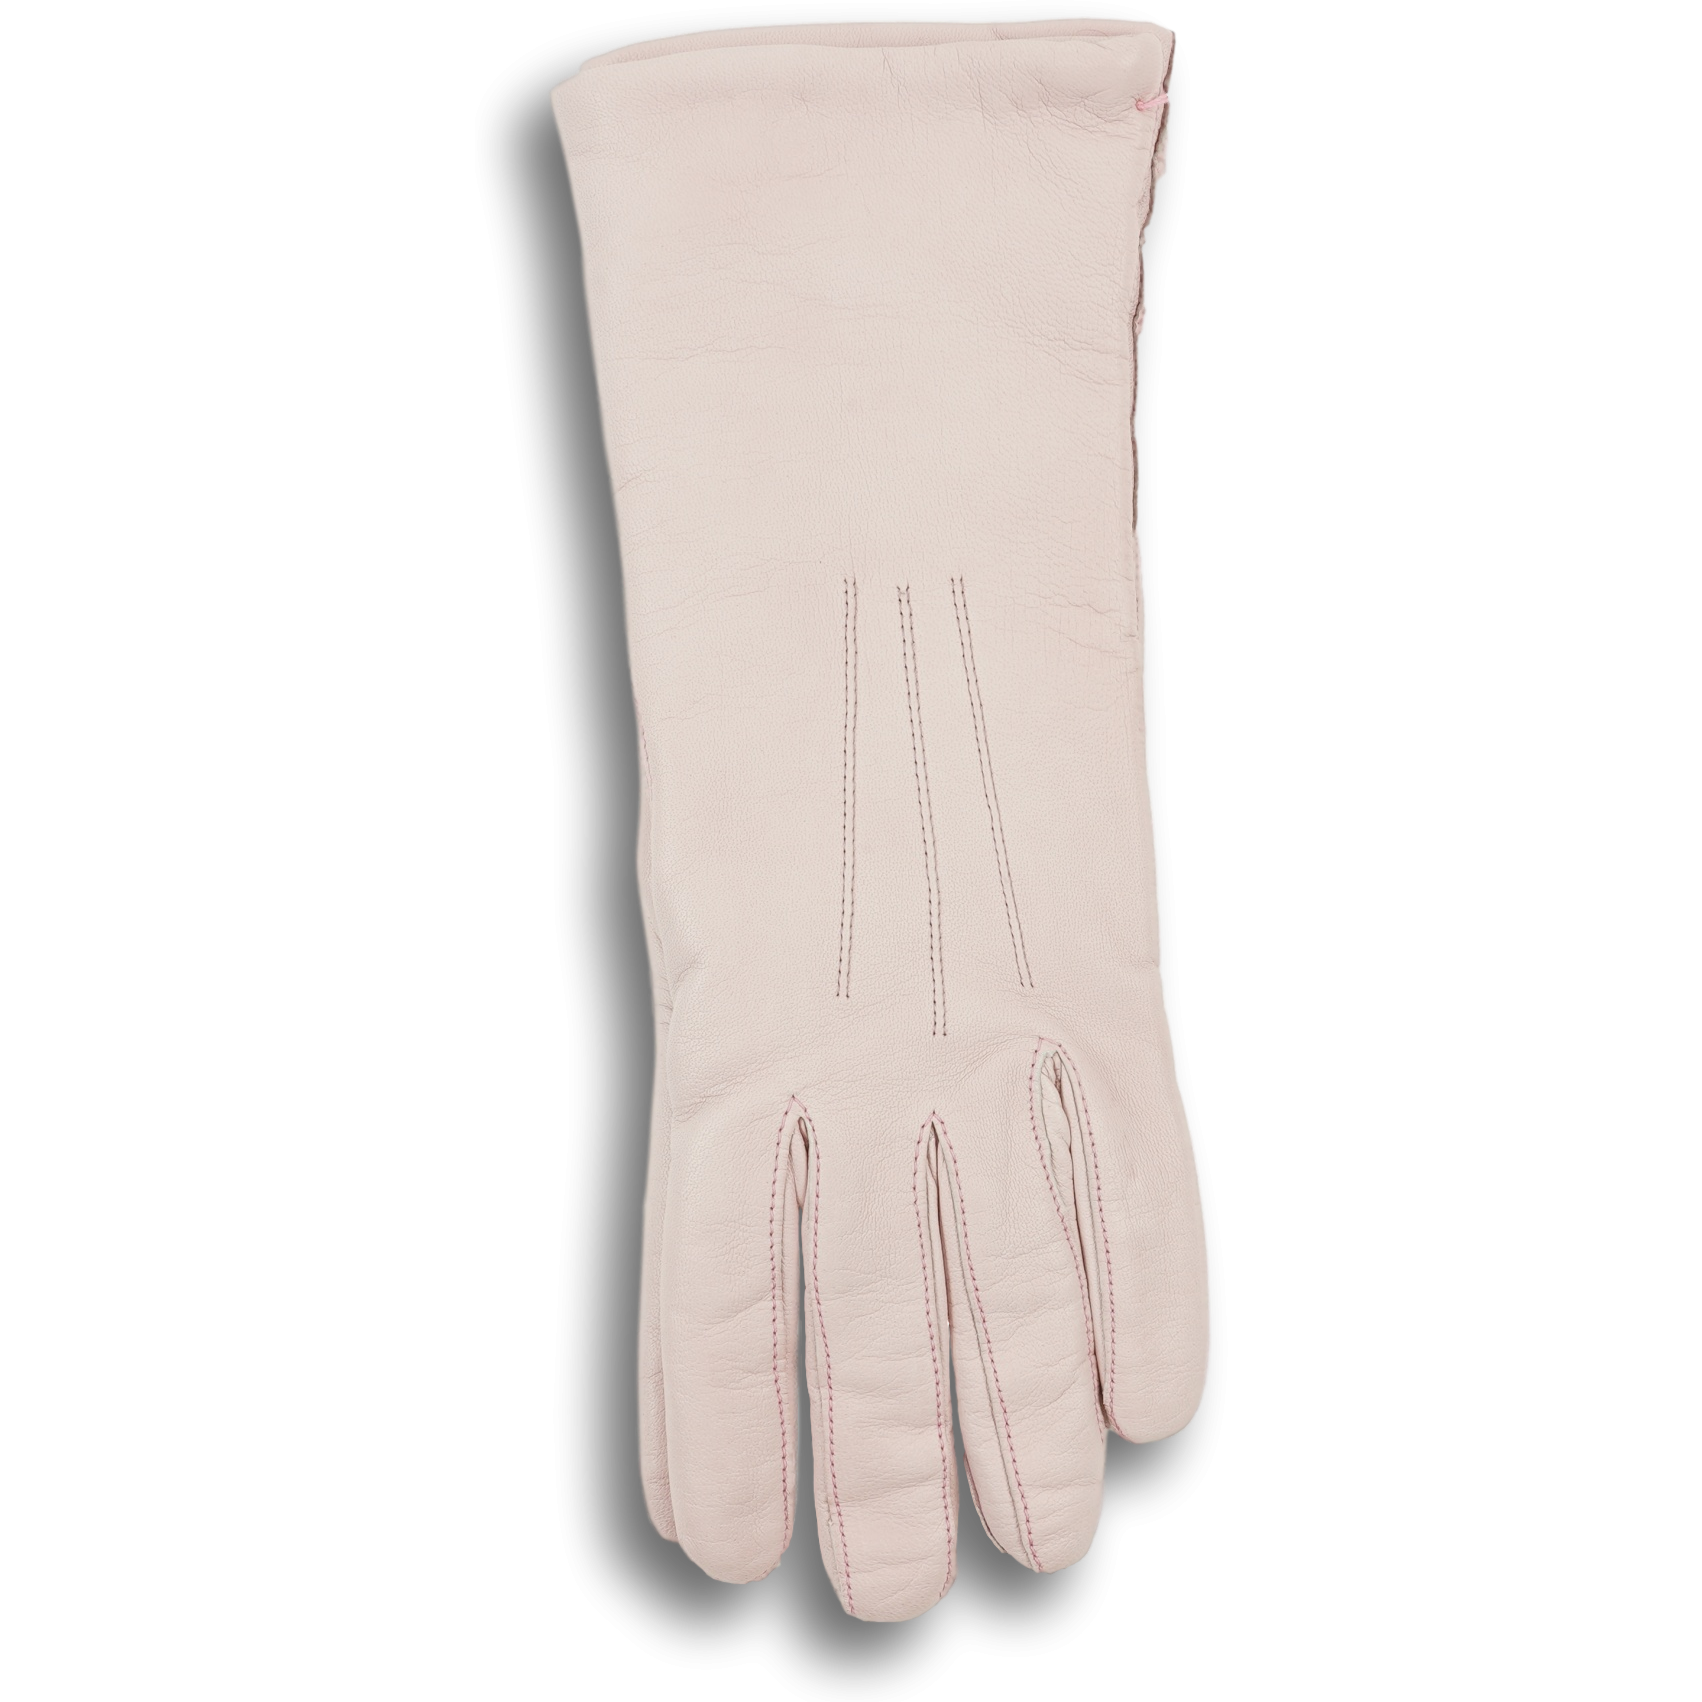 Ladies Handsewn Capeskin Gloves with Cashmere Lining